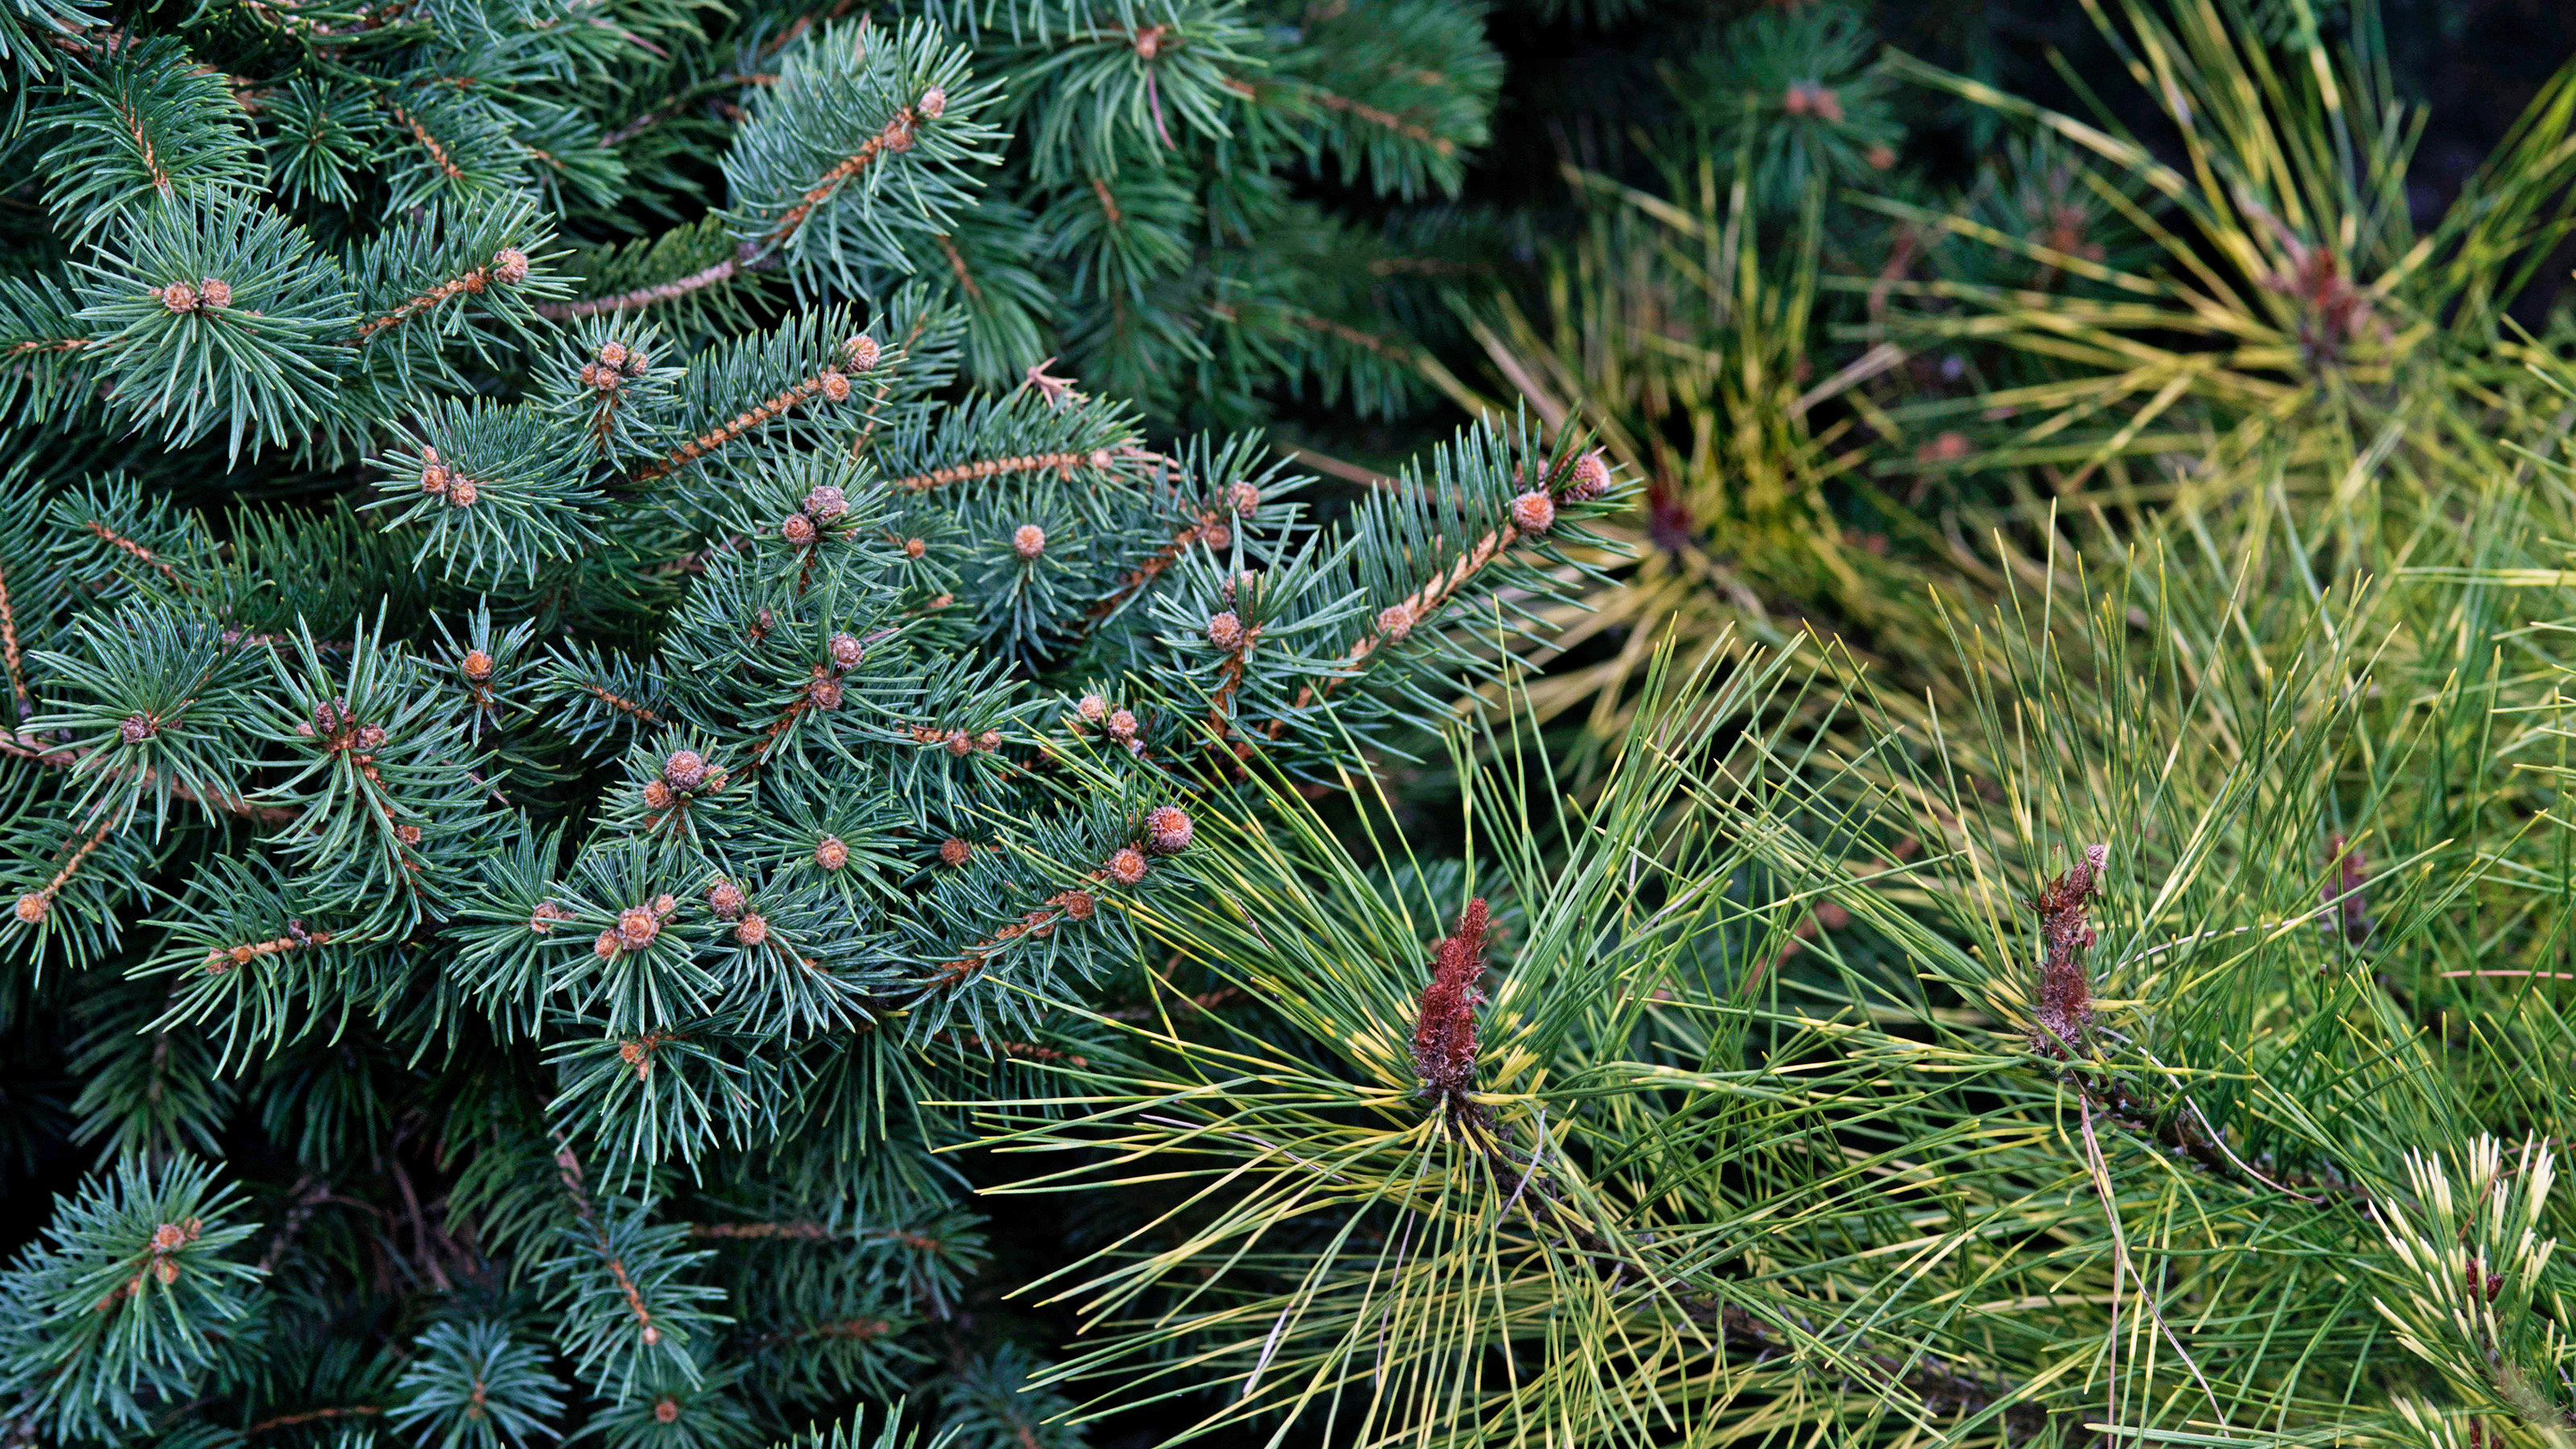 Picea pungens 'Gebelle's' (Golden Spring) Colorado Spruce and Pinus densiflora 'Burke's Red Variegated' Japanese red pine